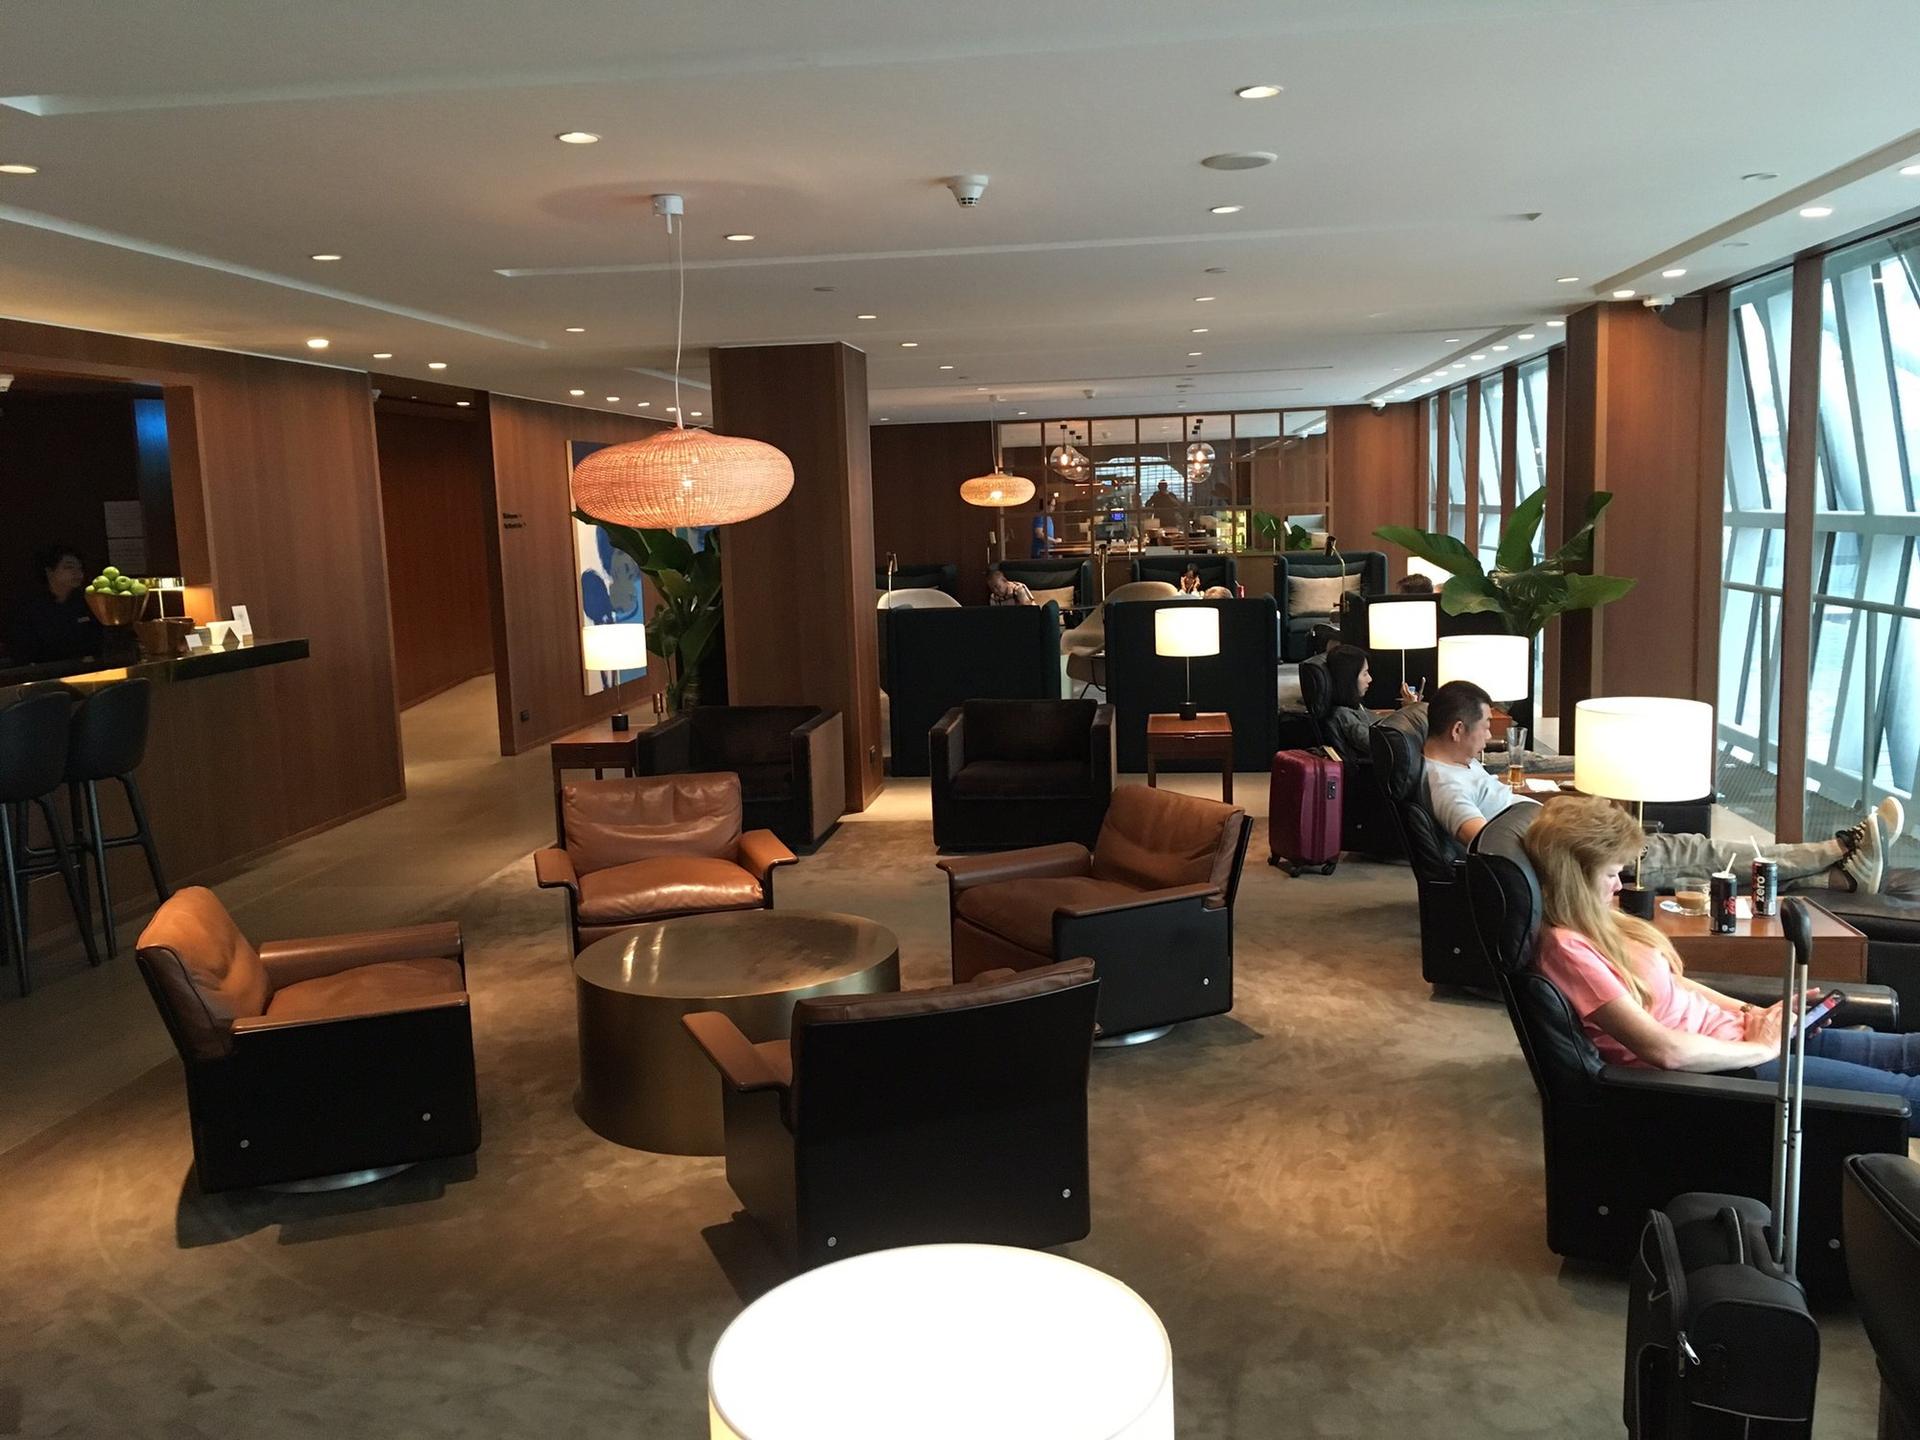 Cathay Pacific First and Business Class Lounge image 13 of 69